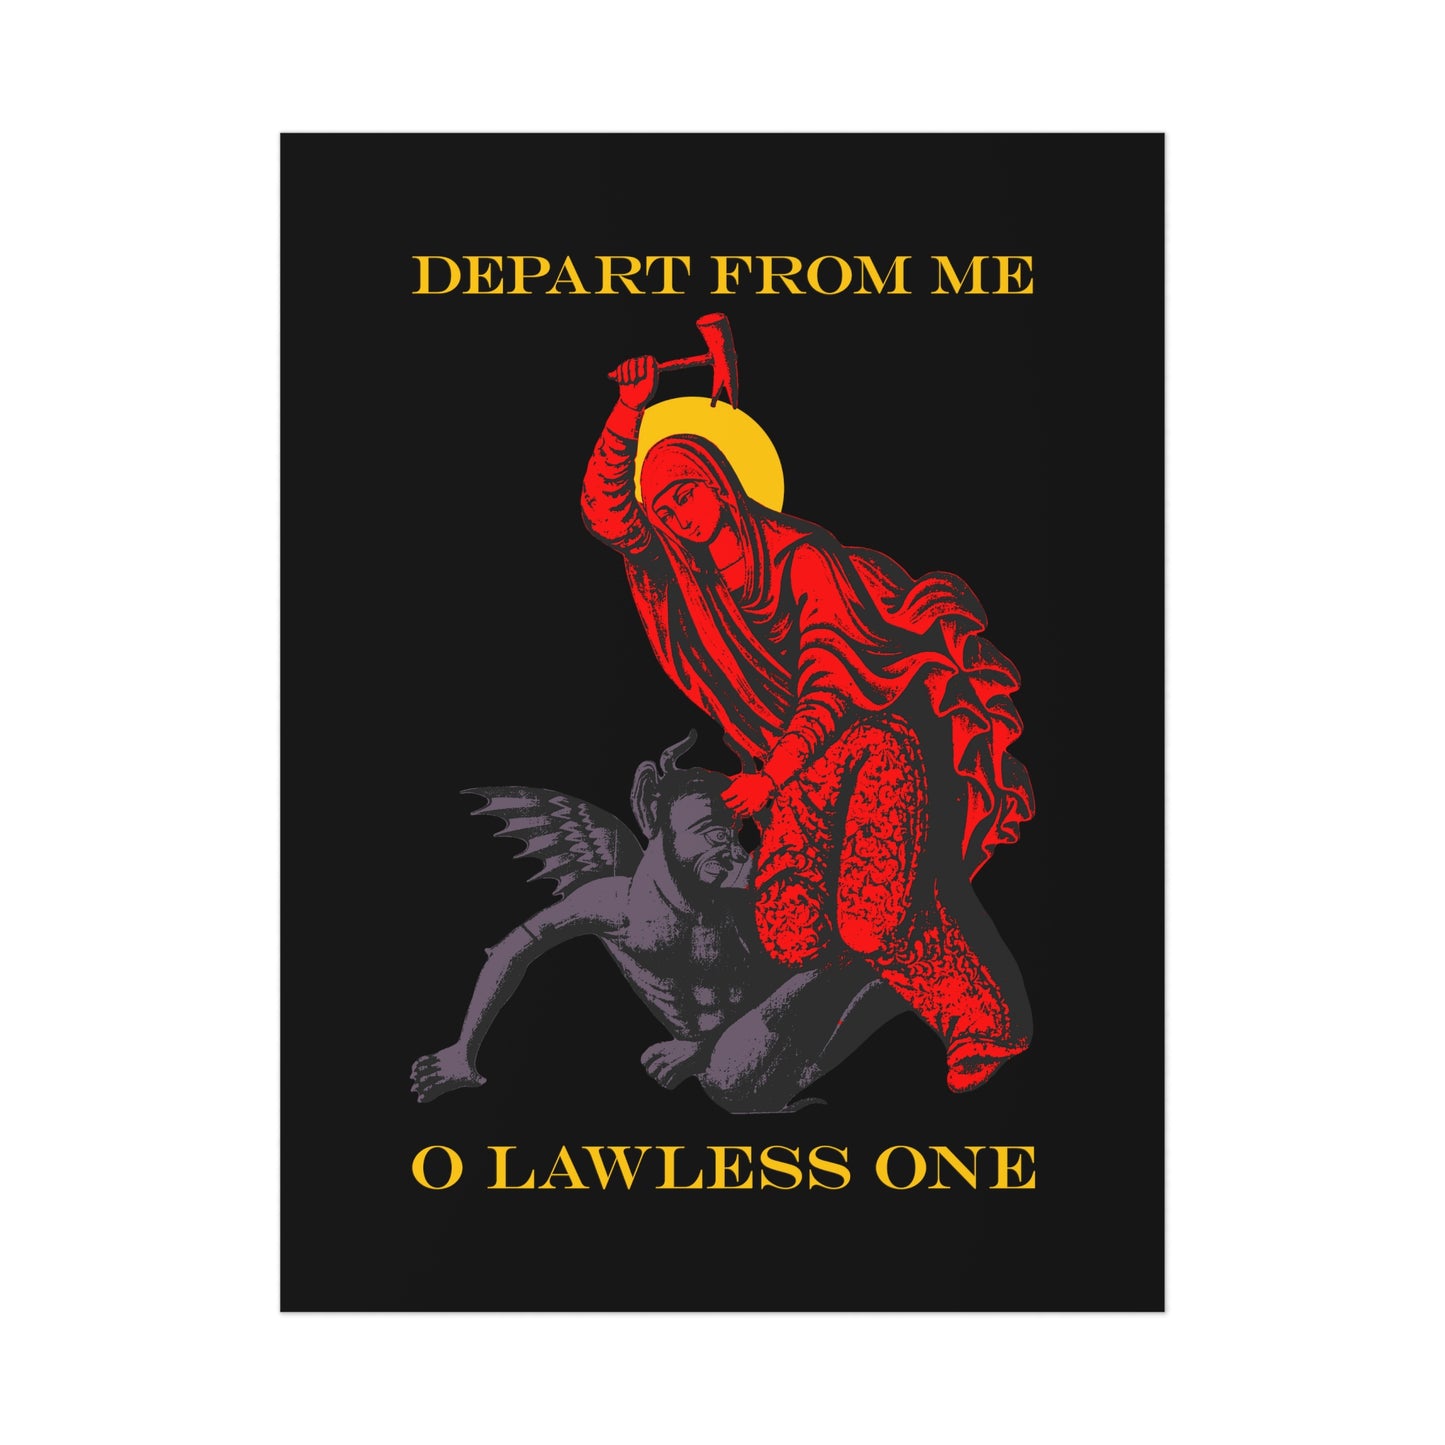 St Marina IconoGraphic (Depart from Me O Lawless One) No. 1 | Orthodox Christian Art Poster